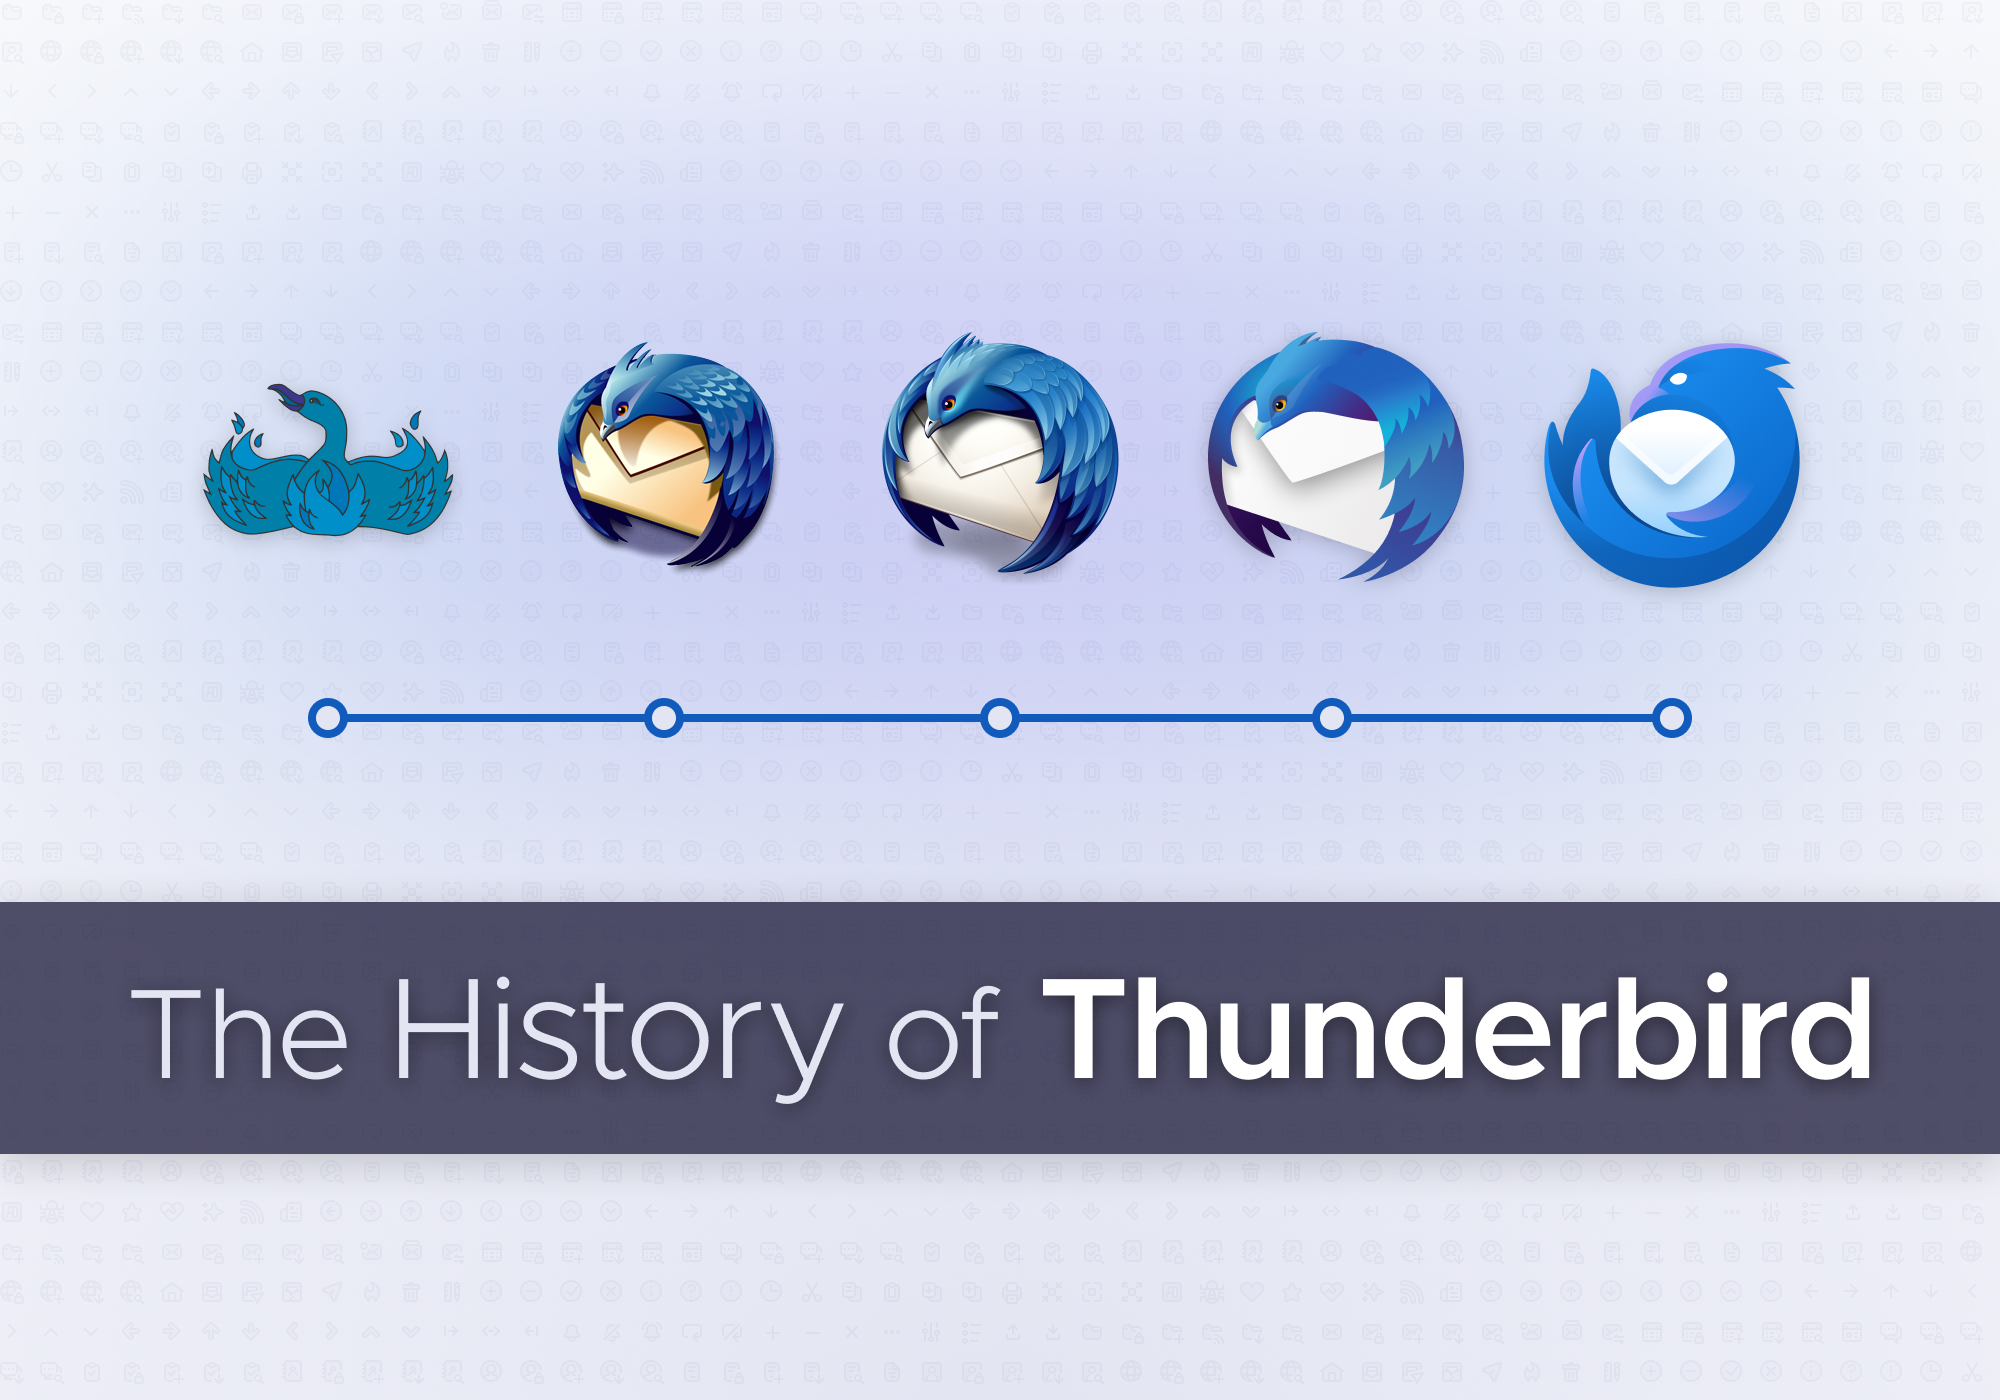 The History of Thunderbird -- graphics that depicts the evolution of the Thunderbird logo throughout the last 20 years.